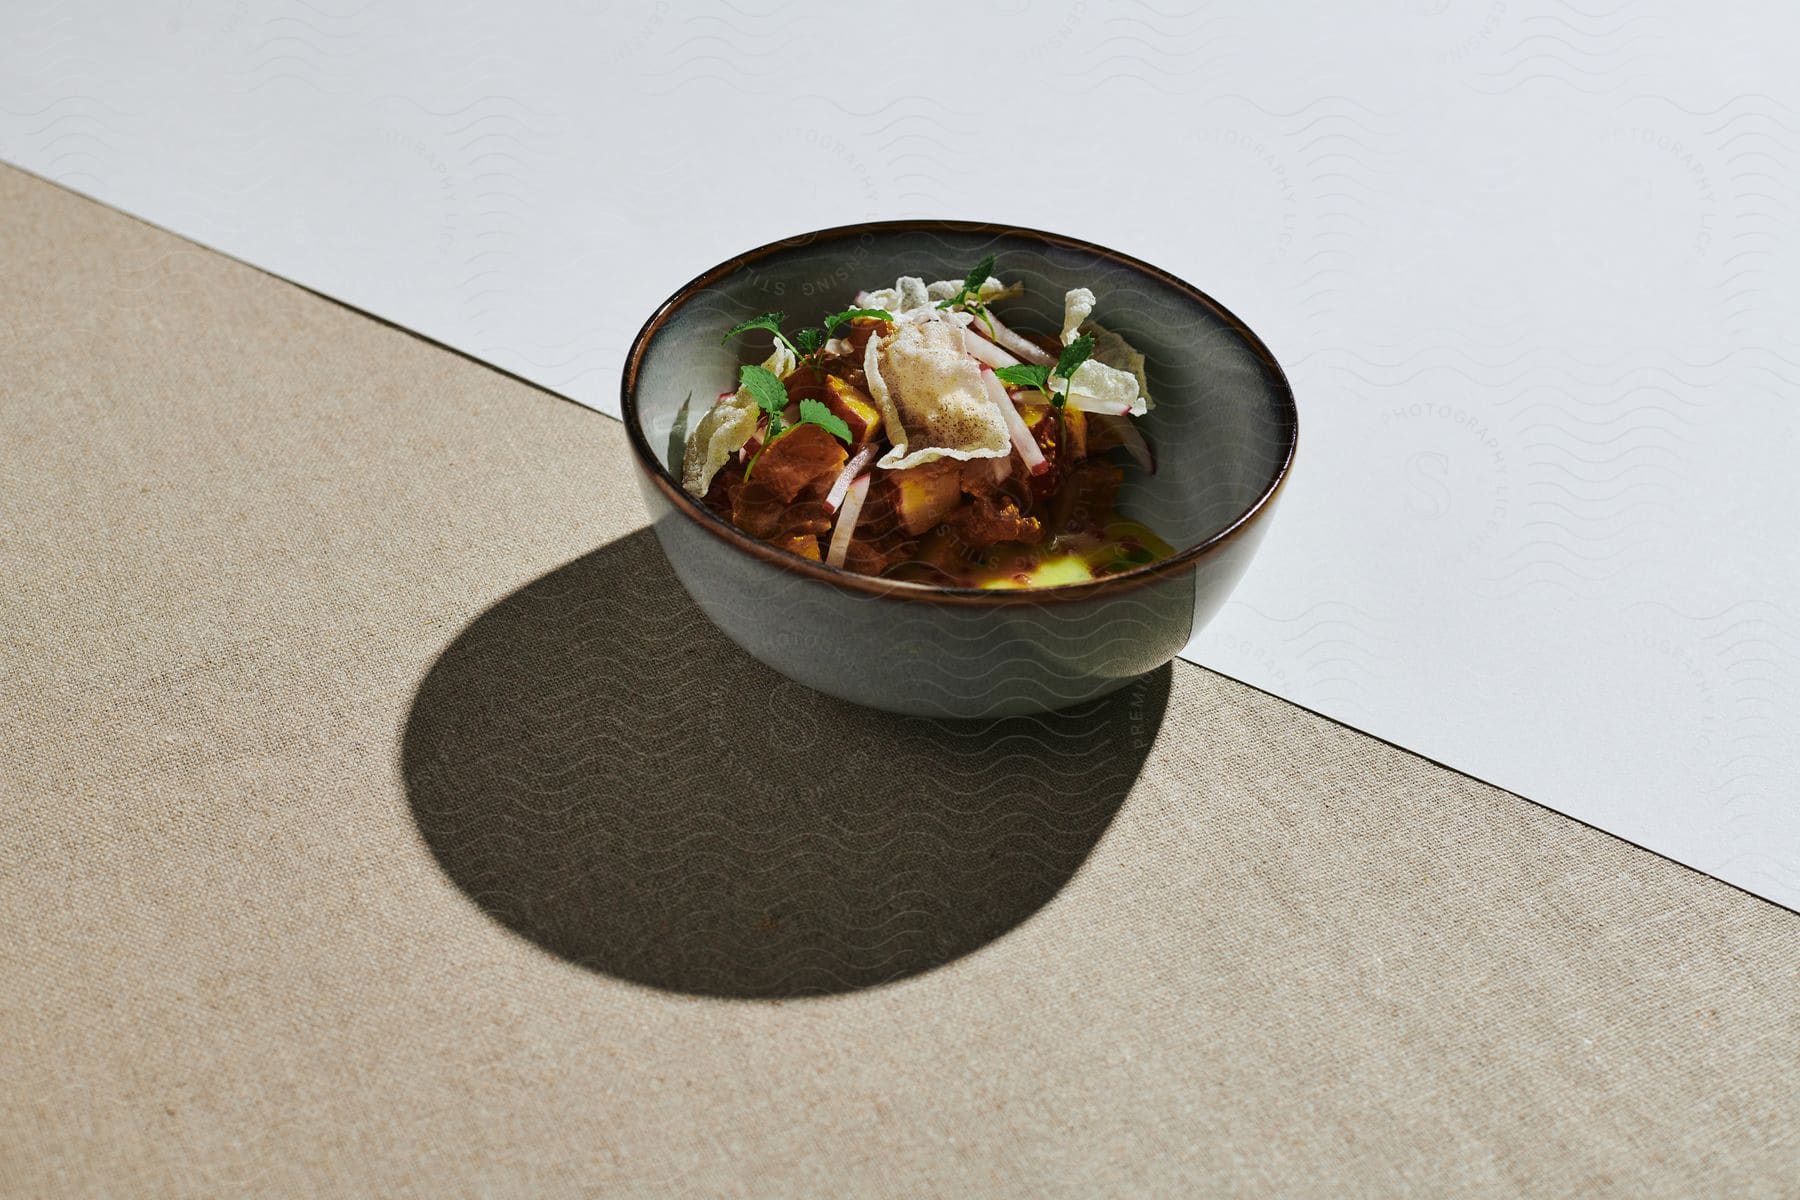 A bowl of stir fry with white noodles sitting outdoors on a surface